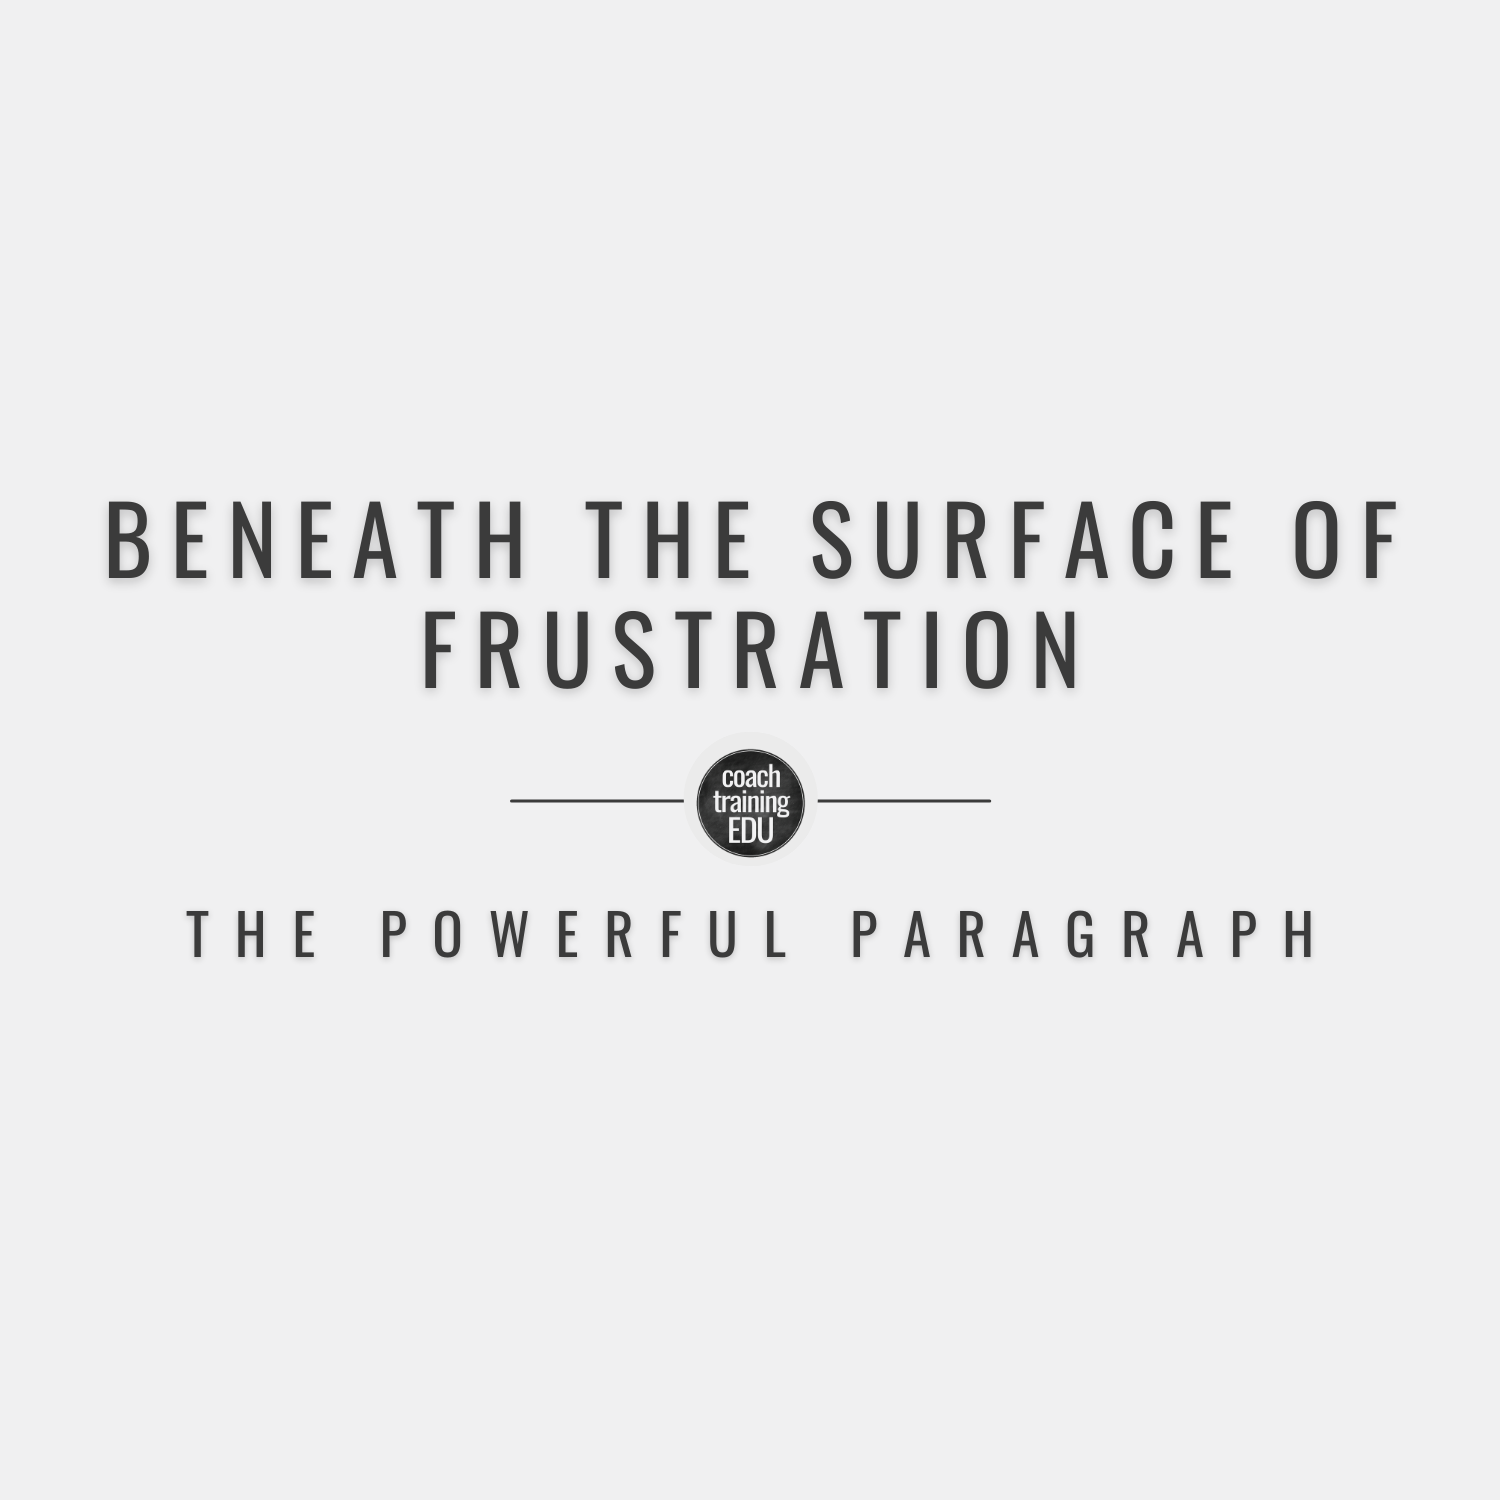 Beneath the Surface of Frustration